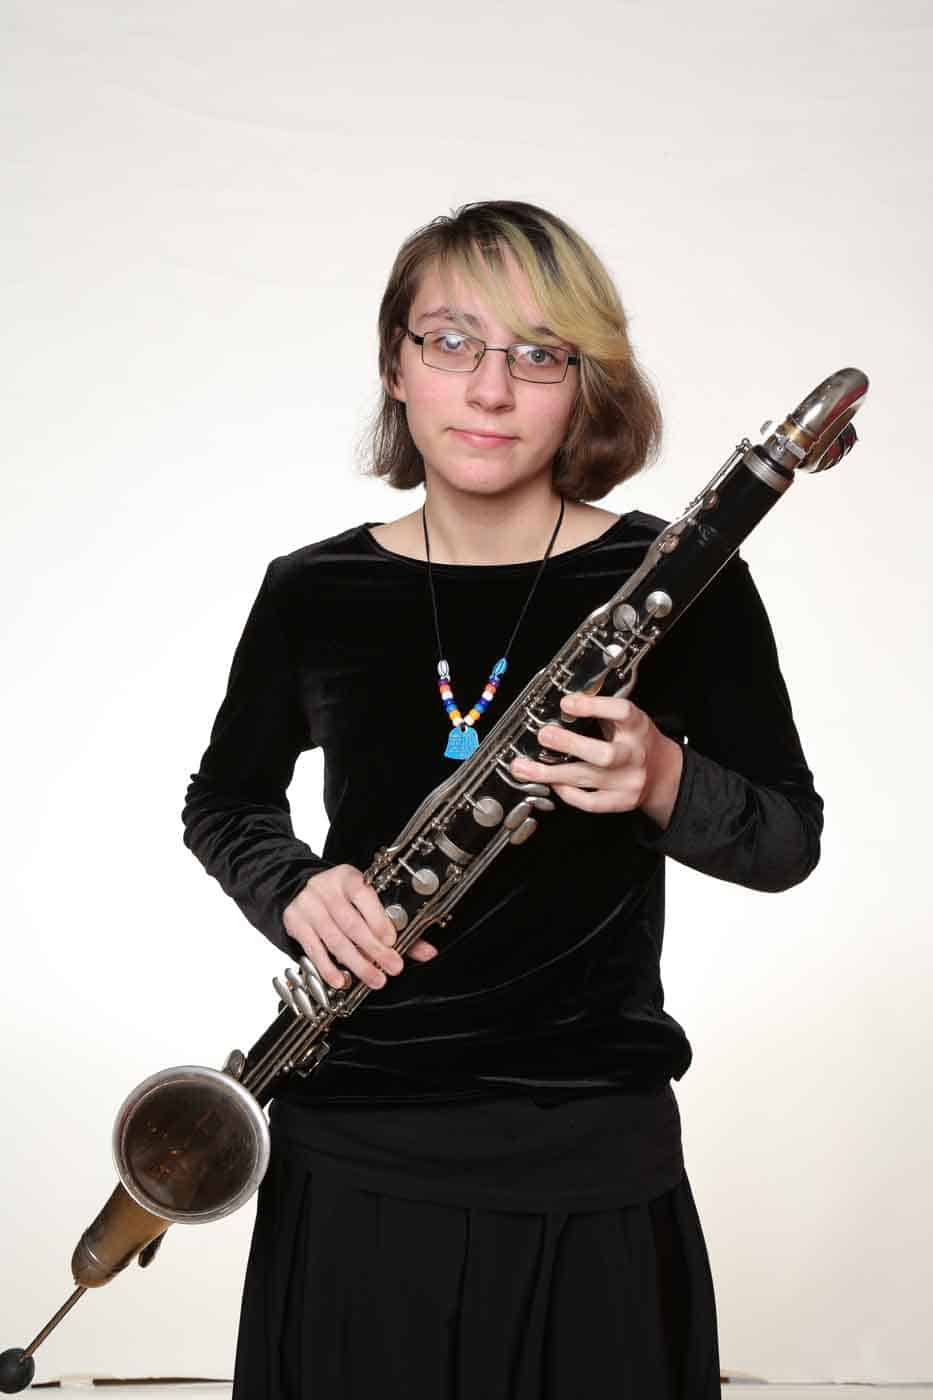 Young girl with woodwind instrument